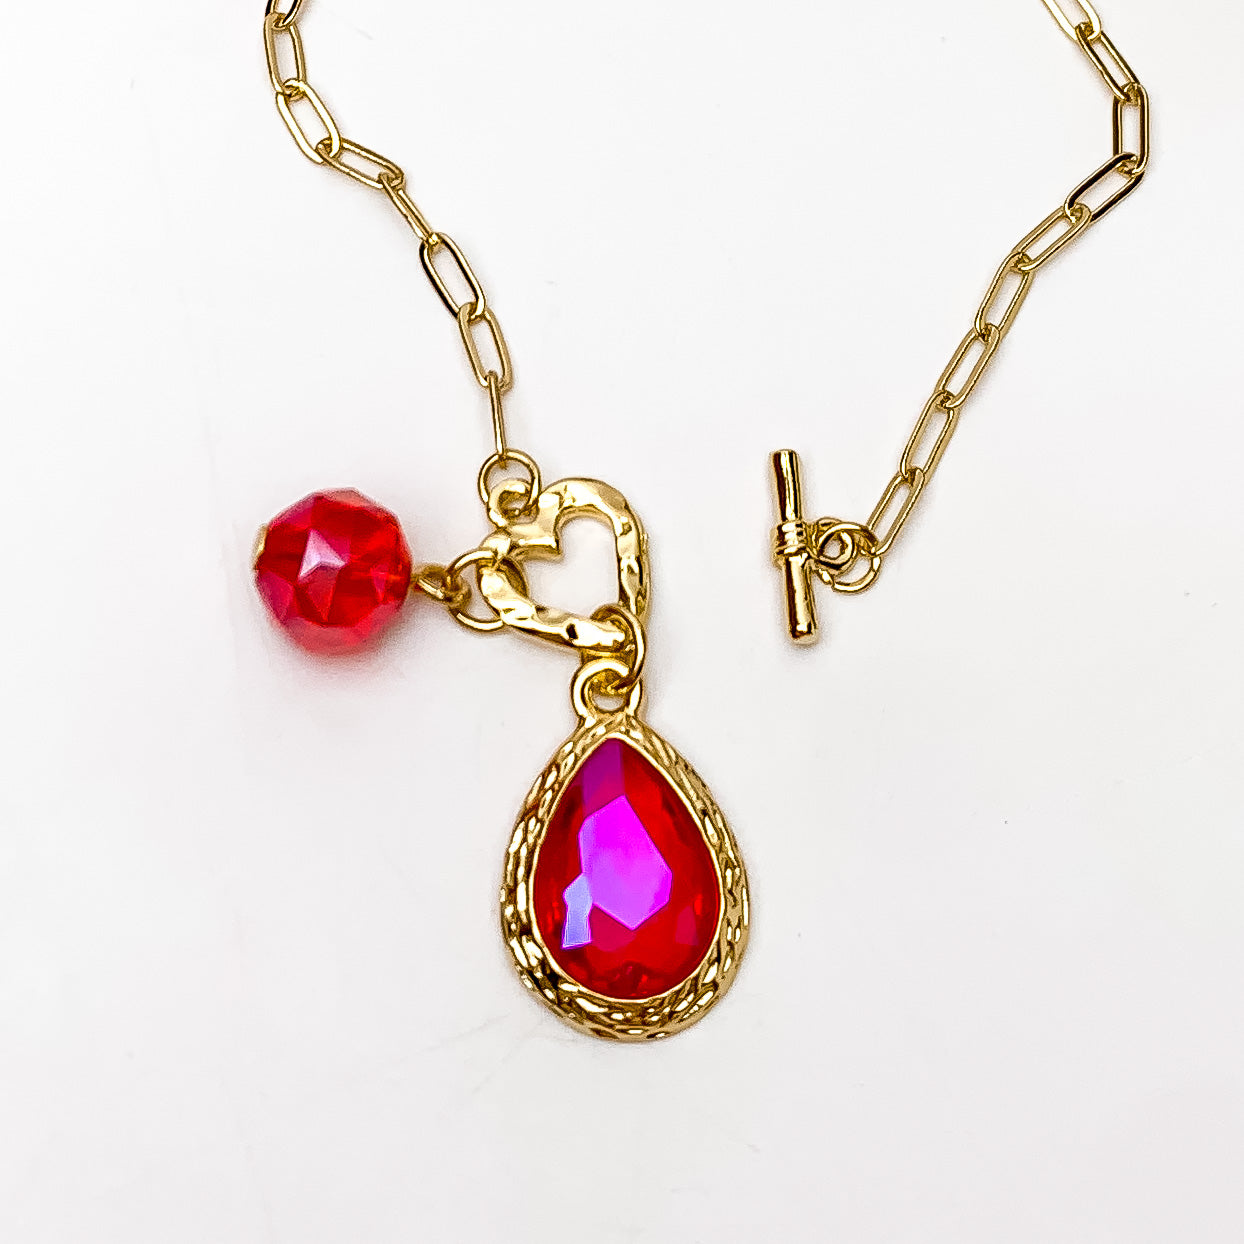 Pink Panache | Gold Tone Chain Necklace with Heart Toggle and Fuchsia Pink Crystal Charms